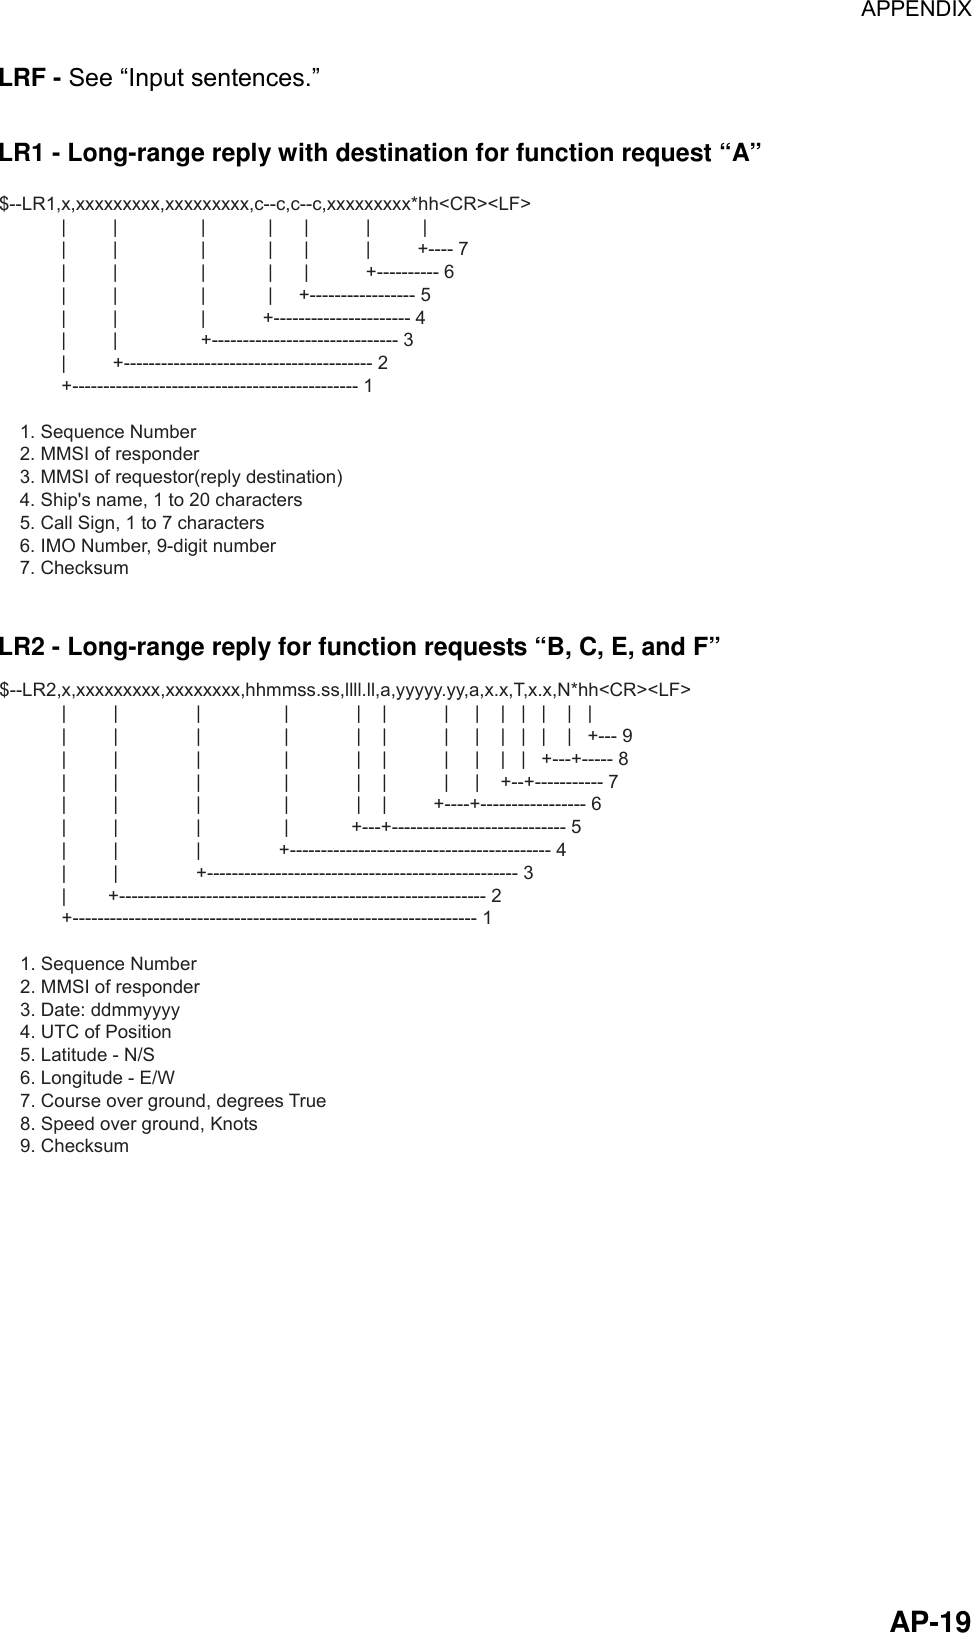 APPENDIX  AP-19LRF - See “Input sentences.”  LR1 - Long-range reply with destination for function request “A” $--LR1,x,xxxxxxxxx,xxxxxxxxx,c--c,c--c,xxxxxxxxx*hh&lt;CR&gt;&lt;LF&gt;            |         |                |            |      |           |          |            |         |                |            |      |           |         +---- 7            |         |                |            |      |           +---------- 6            |         |                |            |     +----------------- 5            |         |                |           +---------------------- 4            |         |                +------------------------------ 3            |         +---------------------------------------- 2            +---------------------------------------------- 1    1. Sequence Number    2. MMSI of responder    3. MMSI of requestor(reply destination)    4. Ship&apos;s name, 1 to 20 characters    5. Call Sign, 1 to 7 characters    6. IMO Number, 9-digit number    7. Checksum  LR2 - Long-range reply for function requests “B, C, E, and F” $--LR2,x,xxxxxxxxx,xxxxxxxx,hhmmss.ss,llll.ll,a,yyyyy.yy,a,x.x,T,x.x,N*hh&lt;CR&gt;&lt;LF&gt;            |         |               |                |             |    |           |     |    |   |   |    |   |            |         |               |                |             |    |           |     |    |   |   |    |   +--- 9            |         |               |                |             |    |           |     |    |   |   +---+----- 8            |         |               |                |             |    |           |     |    +--+----------- 7            |         |               |                |             |    |         +----+----------------- 6            |         |               |                |            +---+---------------------------- 5            |         |               |               +------------------------------------------ 4            |         |               +-------------------------------------------------- 3            |        +----------------------------------------------------------- 2            +----------------------------------------------------------------- 1    1. Sequence Number    2. MMSI of responder    3. Date: ddmmyyyy    4. UTC of Position    5. Latitude - N/S    6. Longitude - E/W    7. Course over ground, degrees True    8. Speed over ground, Knots    9. Checksum  